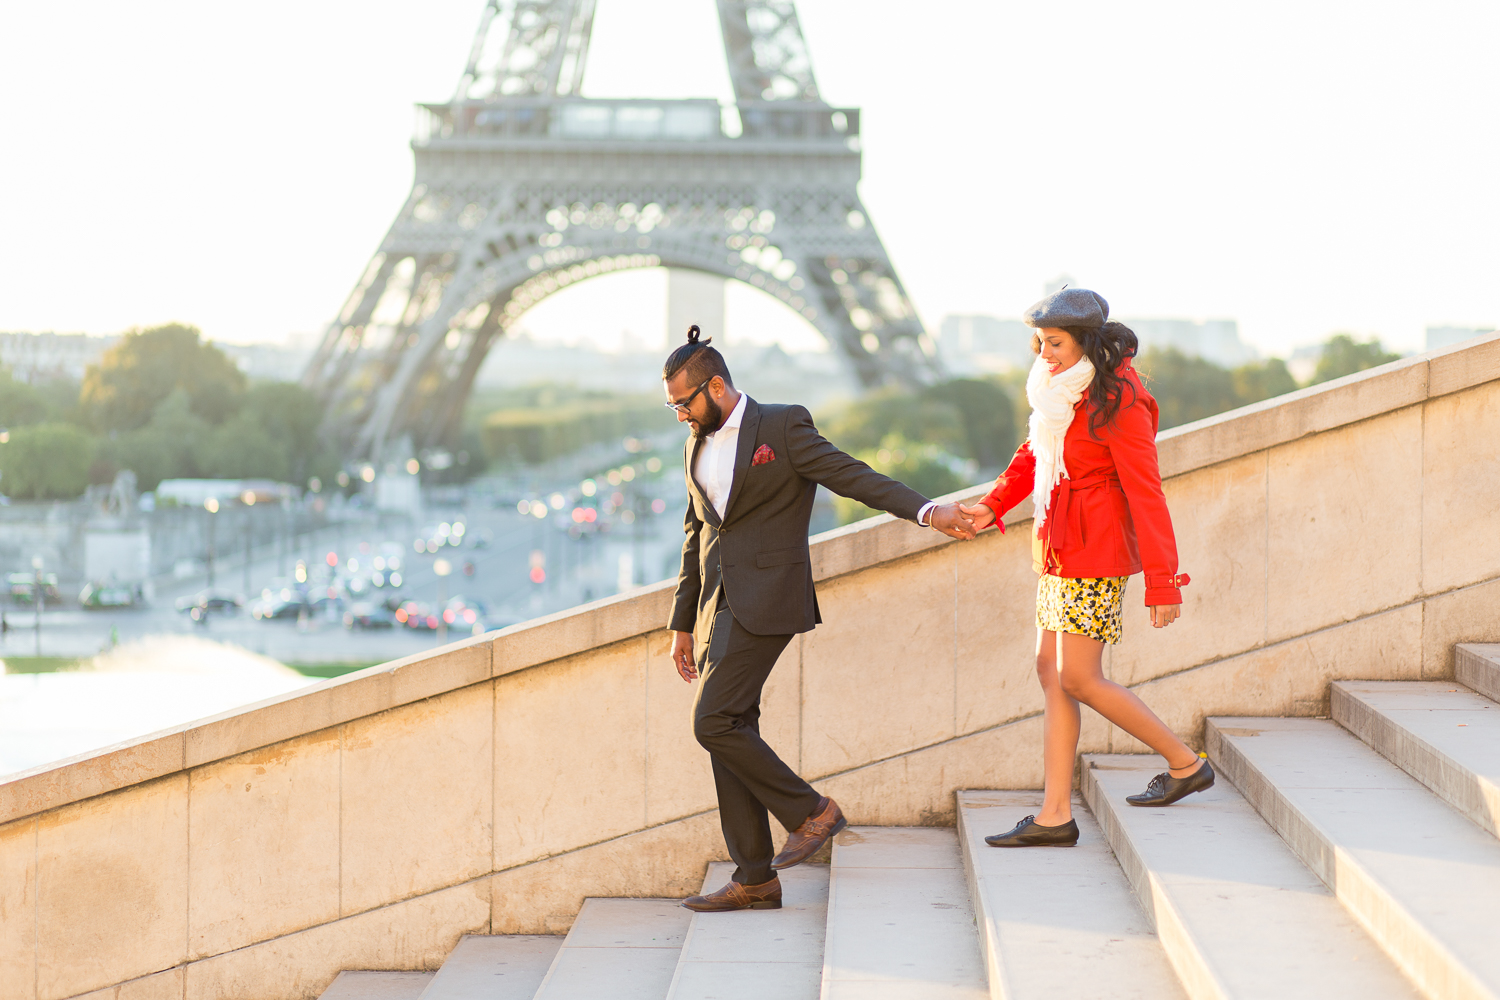 fall-outdoor-engagement-couples-photo-session-paris-photographer_002.jpg